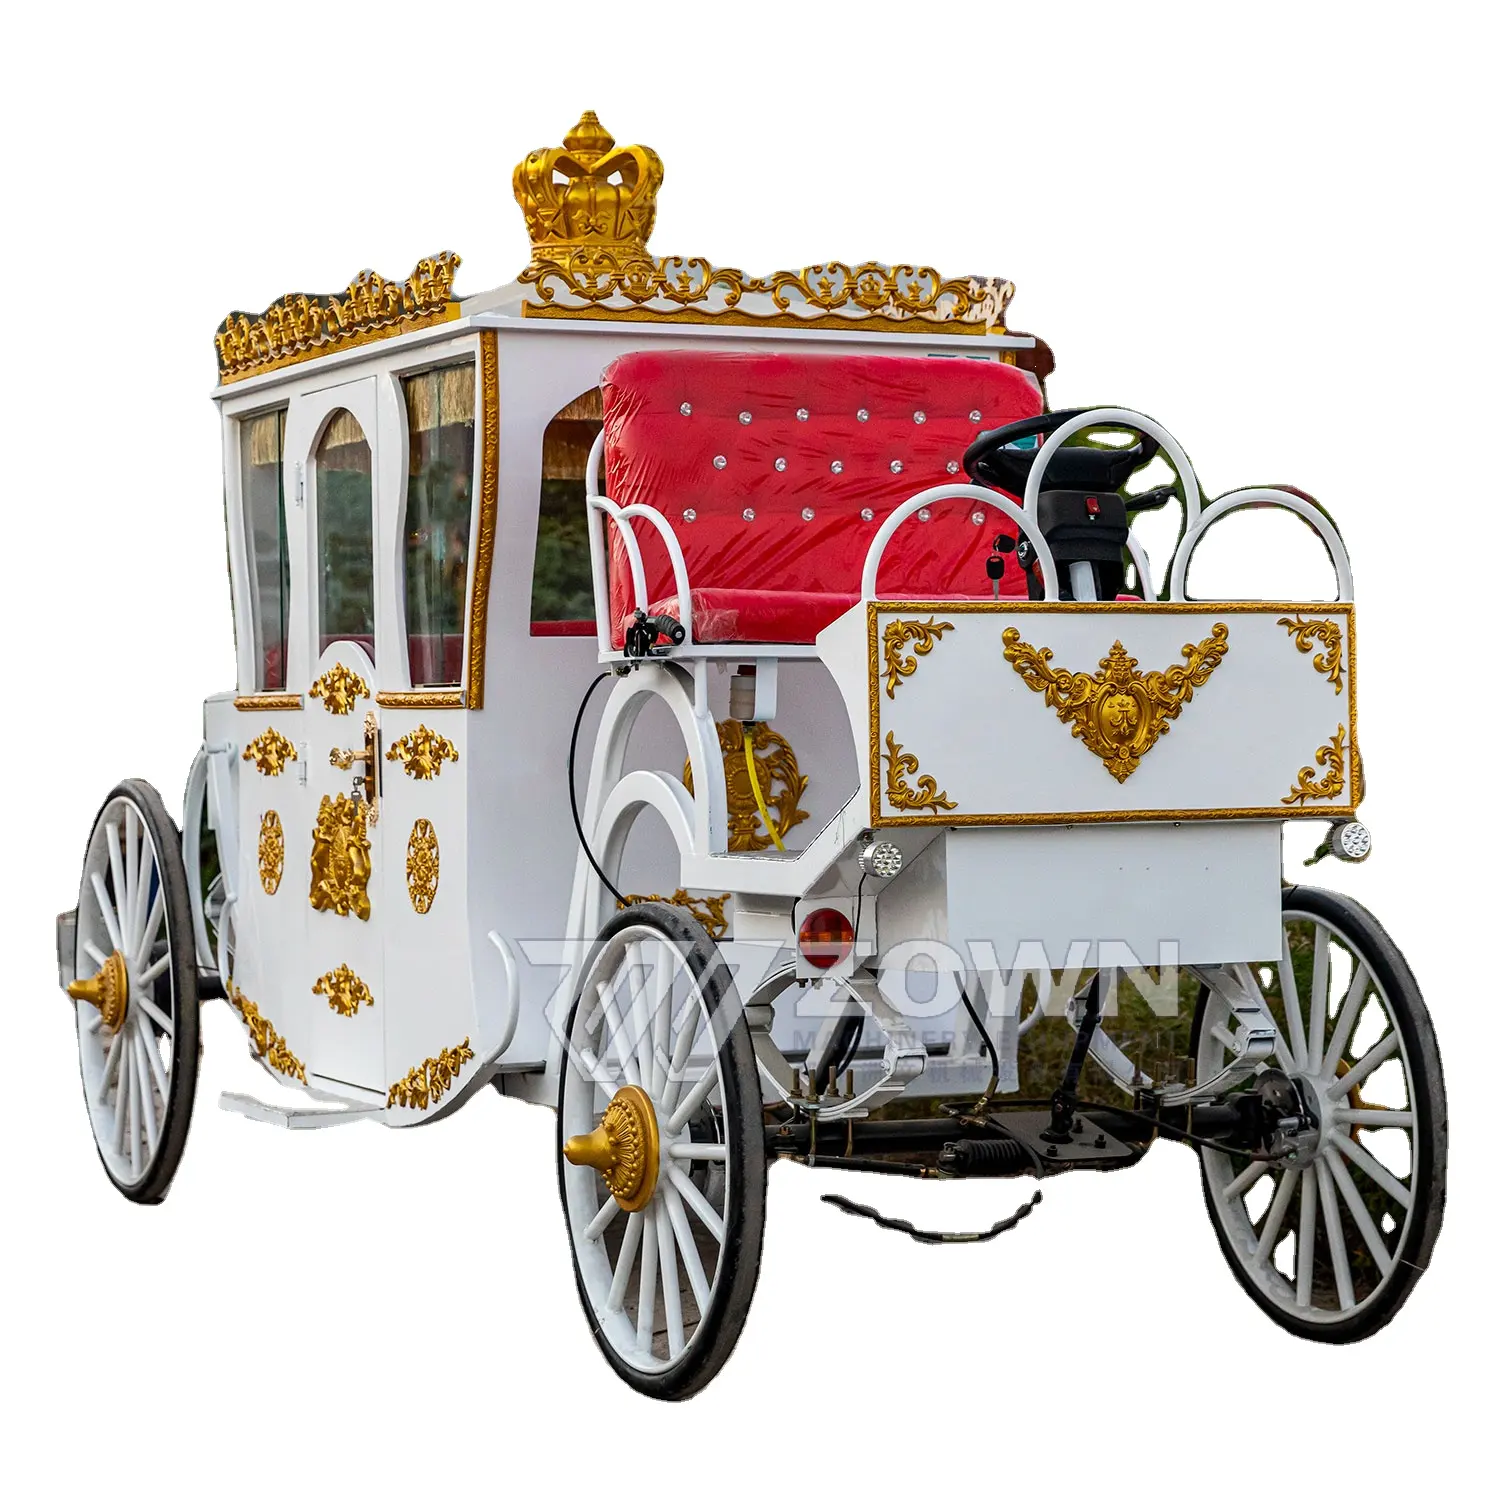 Luxurious electric royal tourist carriage wedding carriage classical comfortable European royal carriage